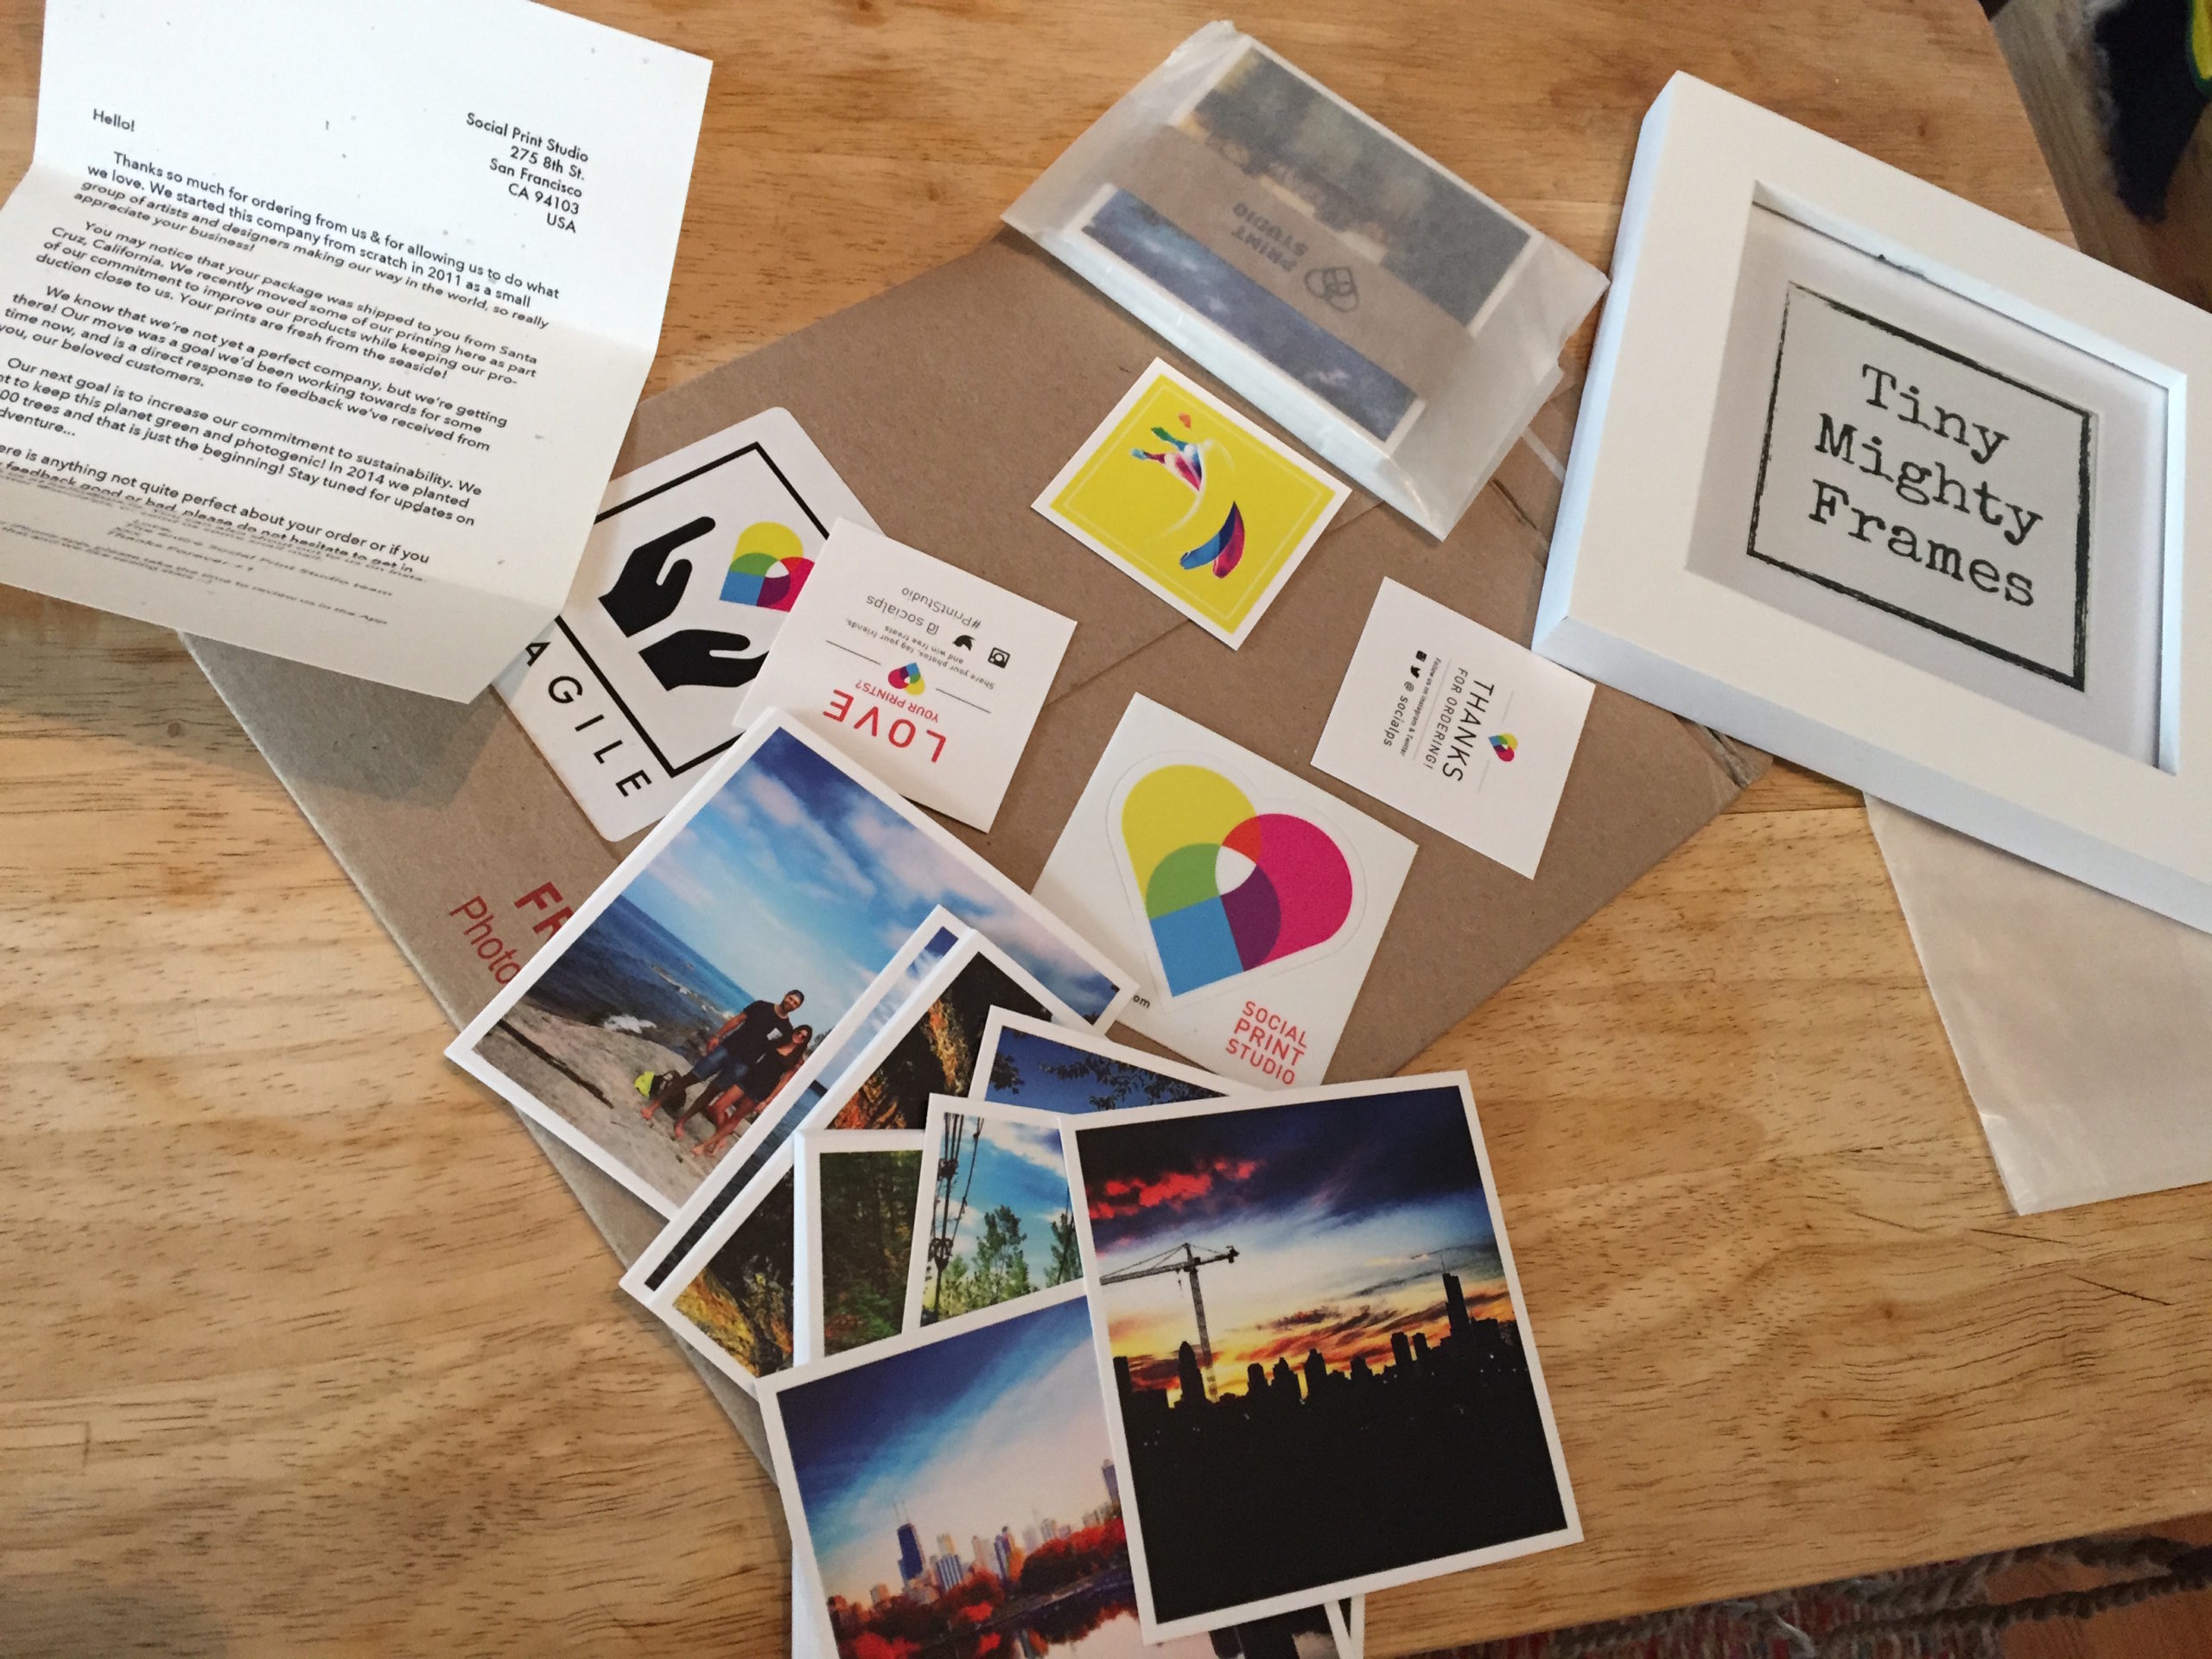 Print your Instagram photos with Social Print Studio [Grandmother approved]